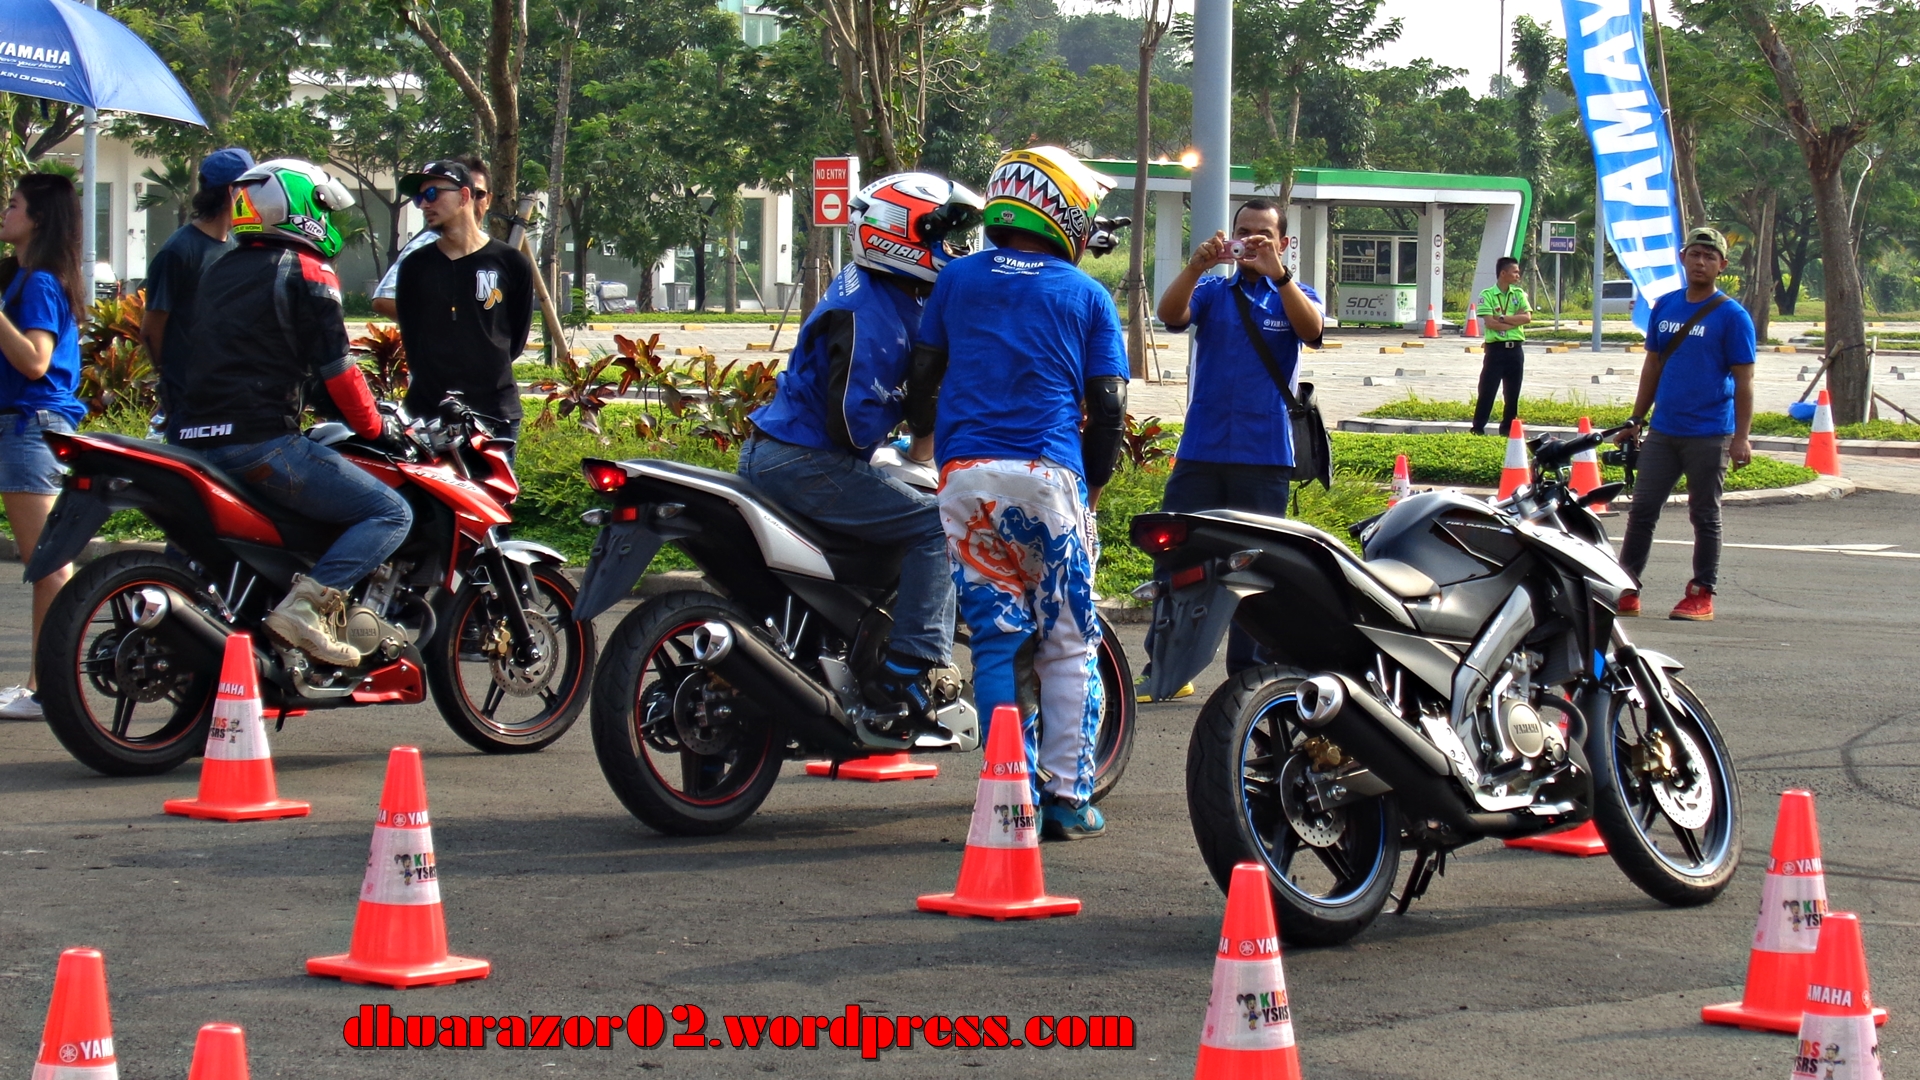 Review Test Ride Dhuarazor02